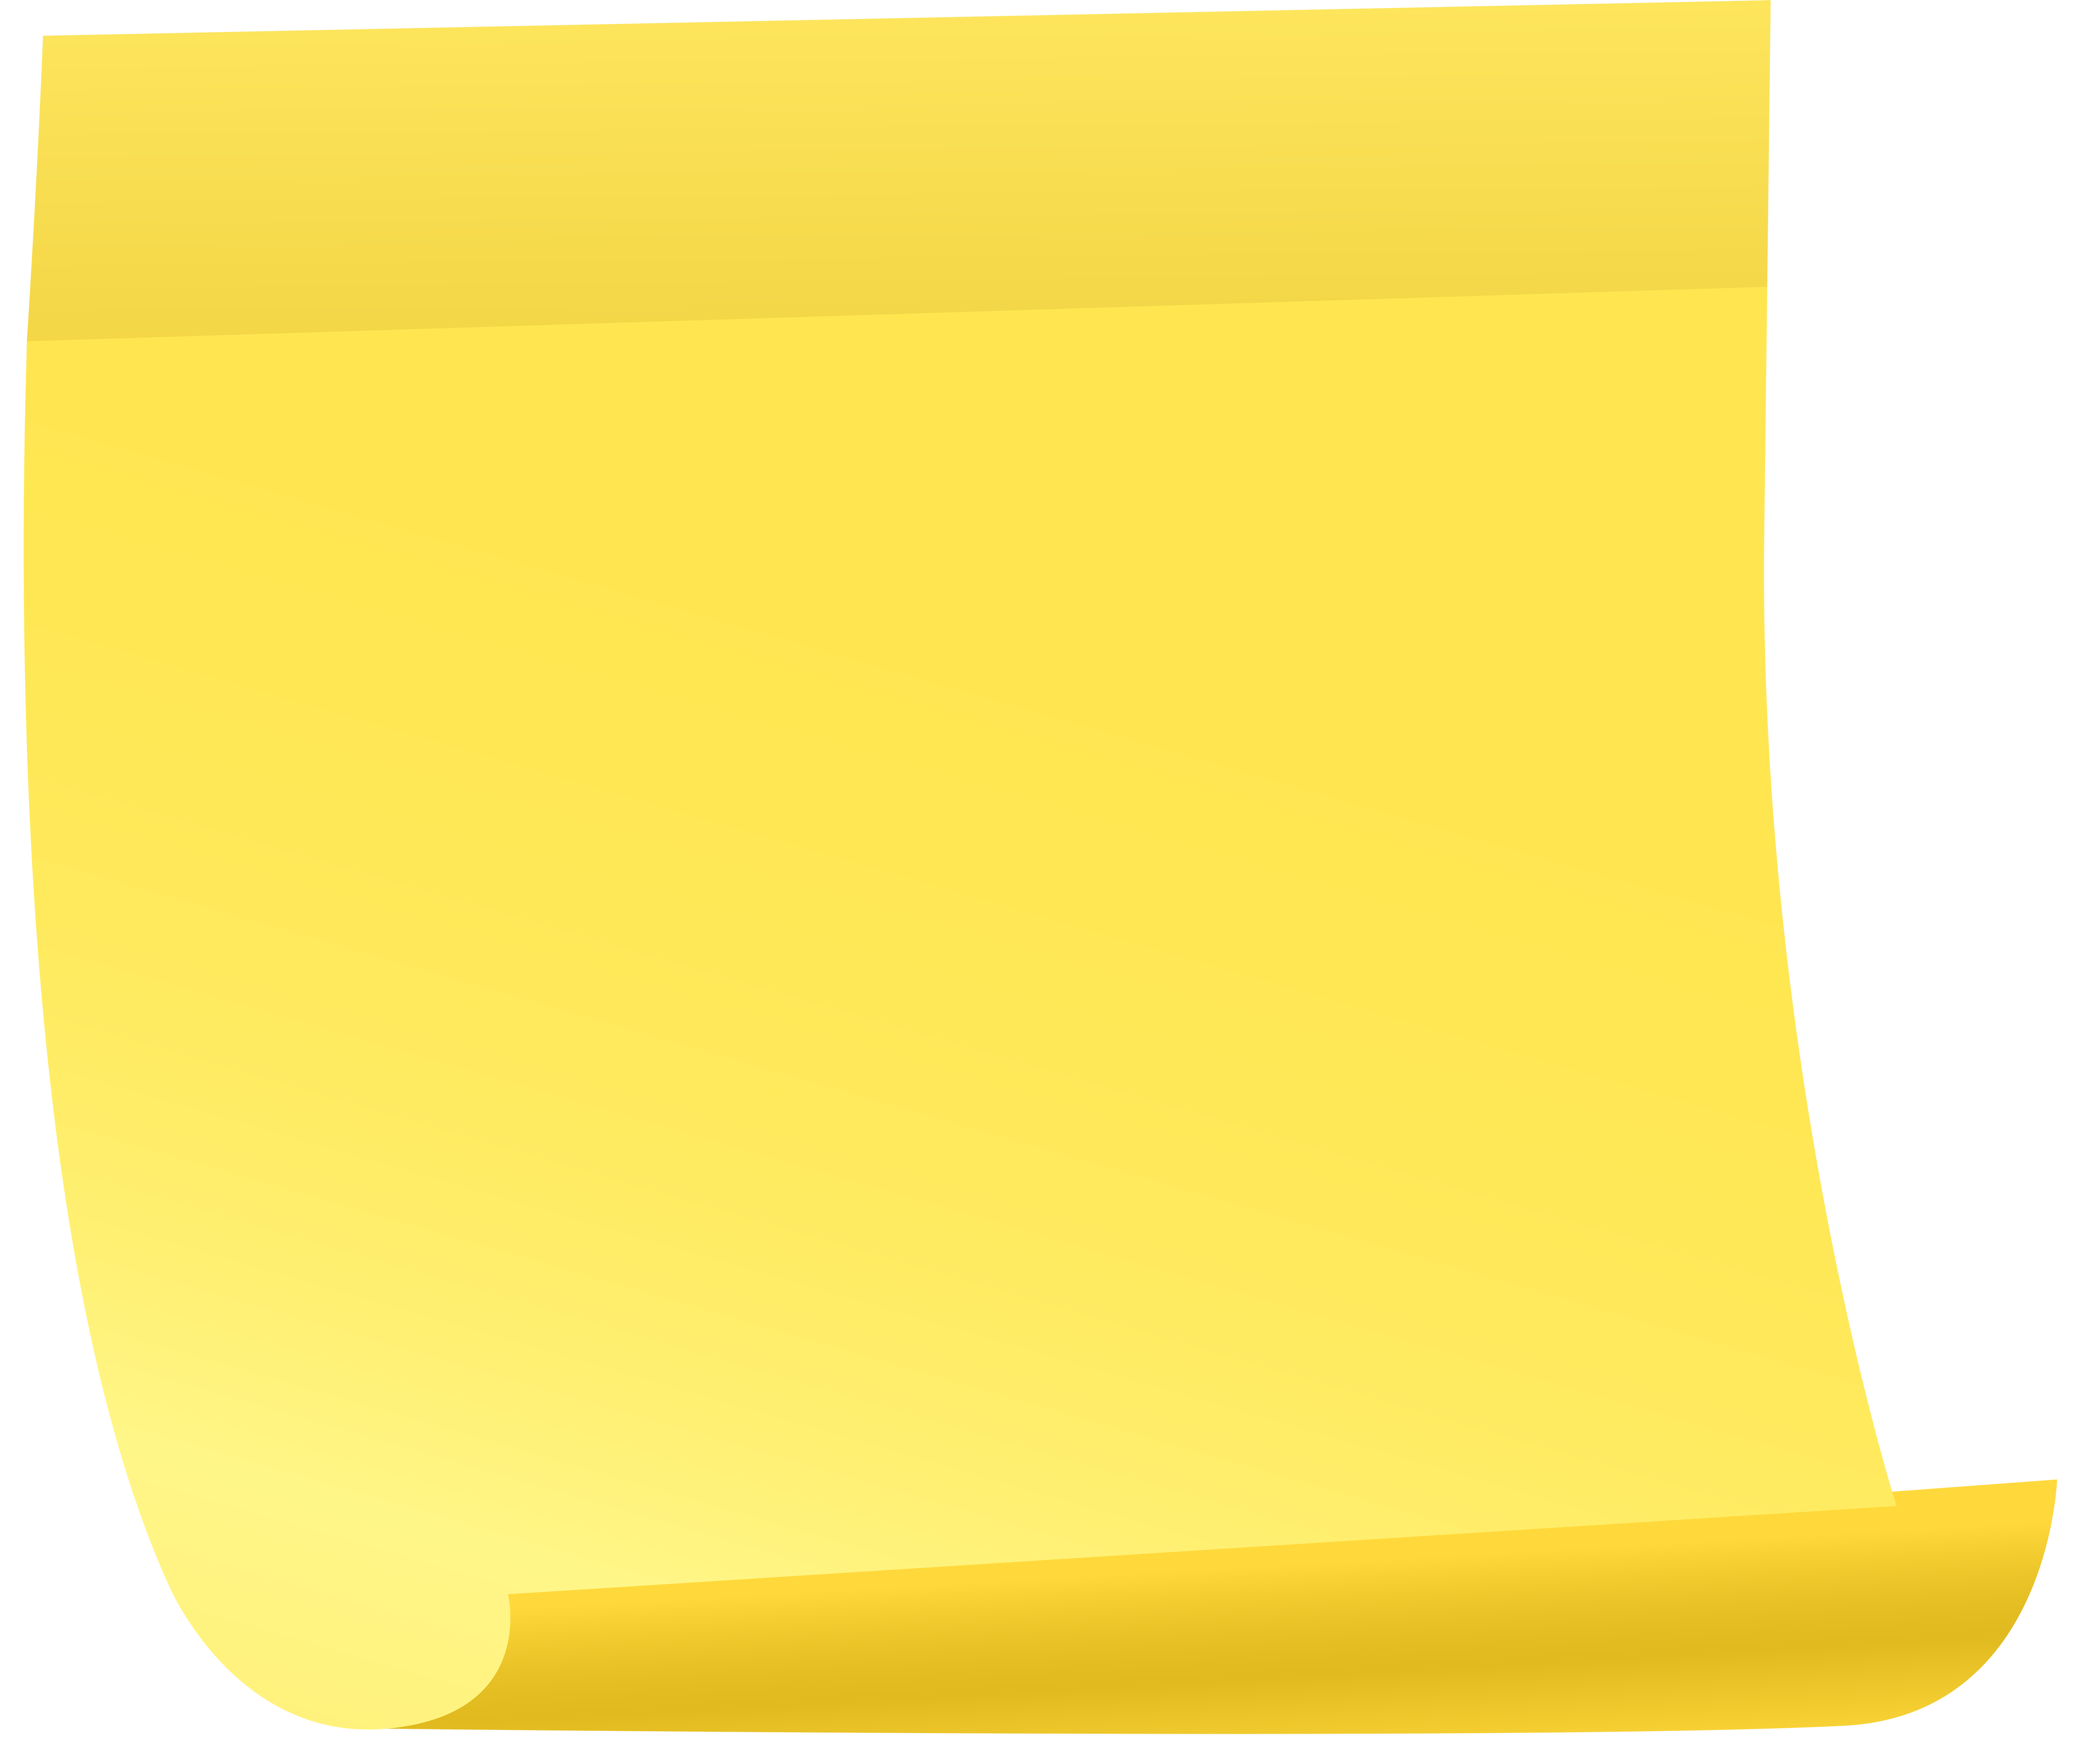 notes clipart yellow